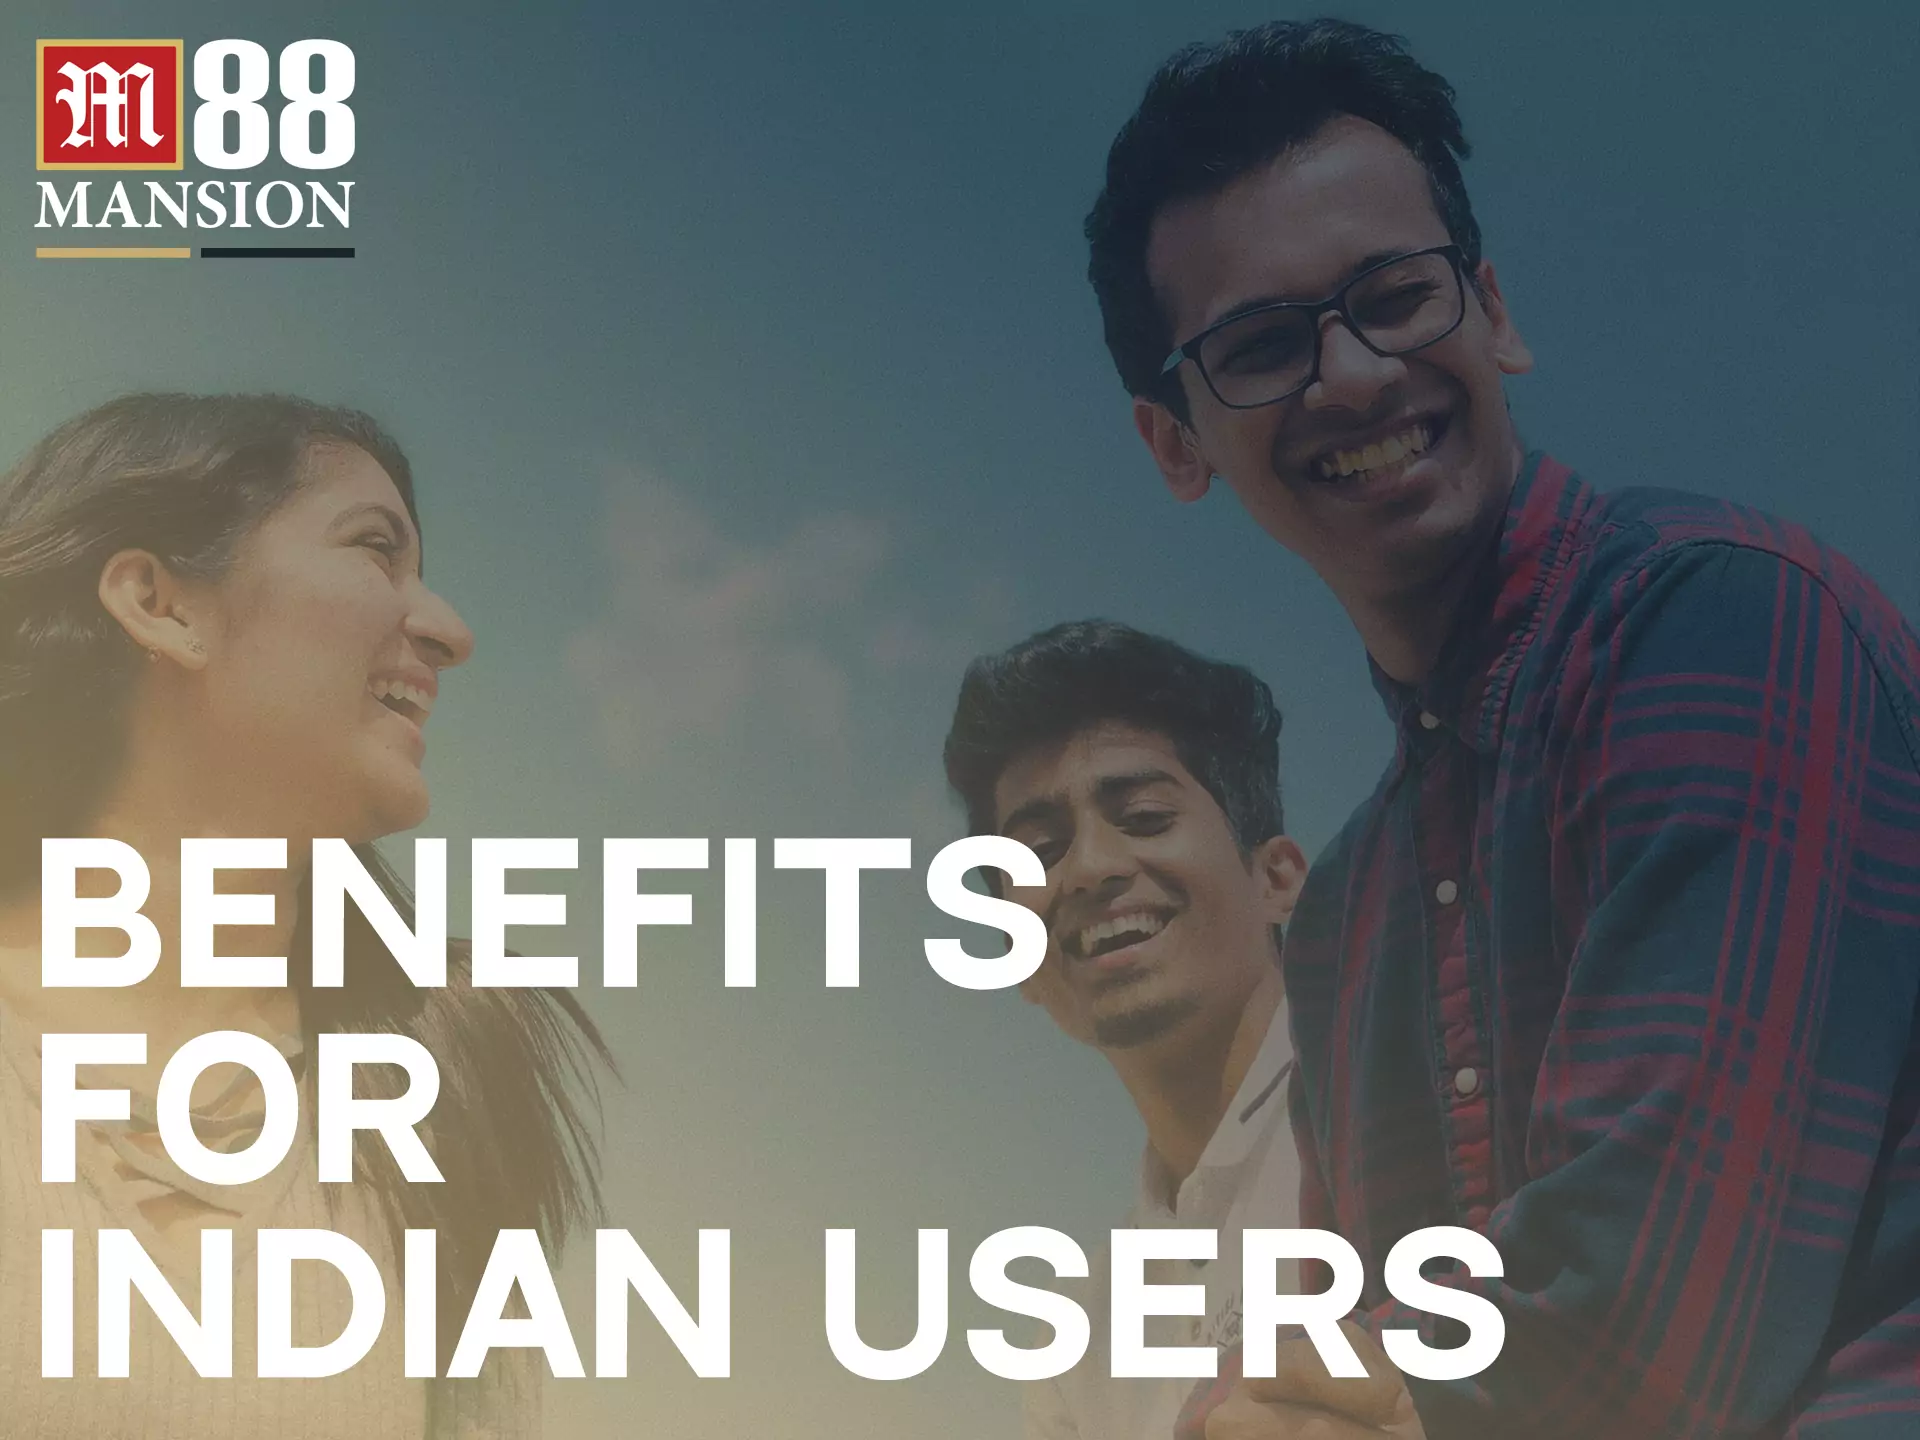 Since M88 is an Indian-targeted bookmaker, the site has lots of benefits for users from India.